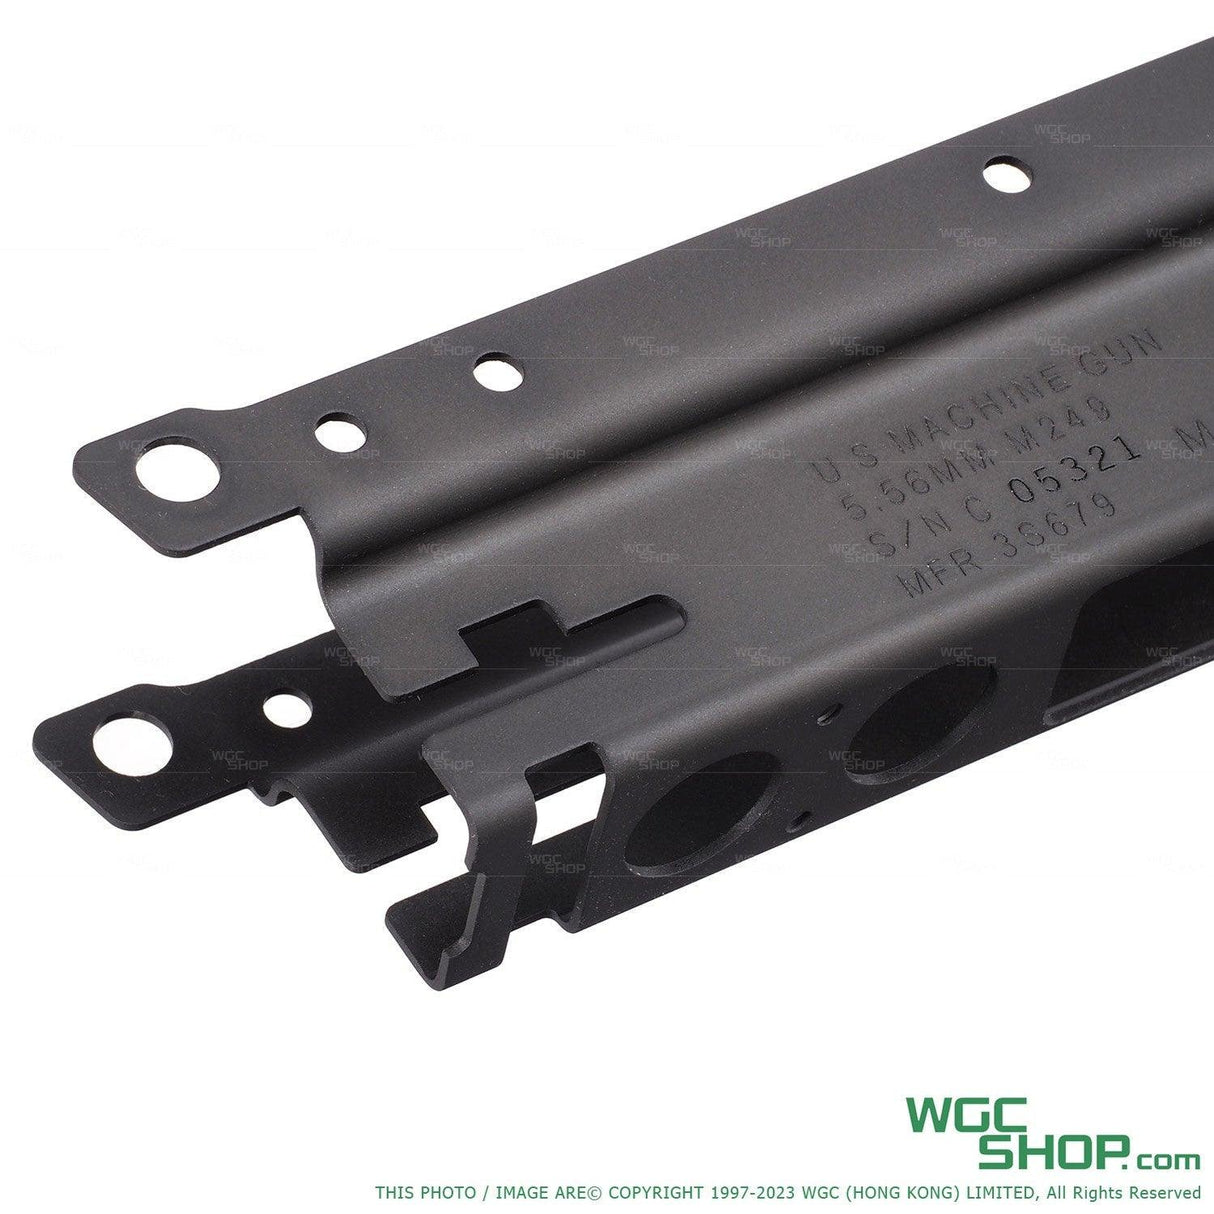 dnA Steel Receiver for VFC M249 GBB Airsoft - WGC Shop